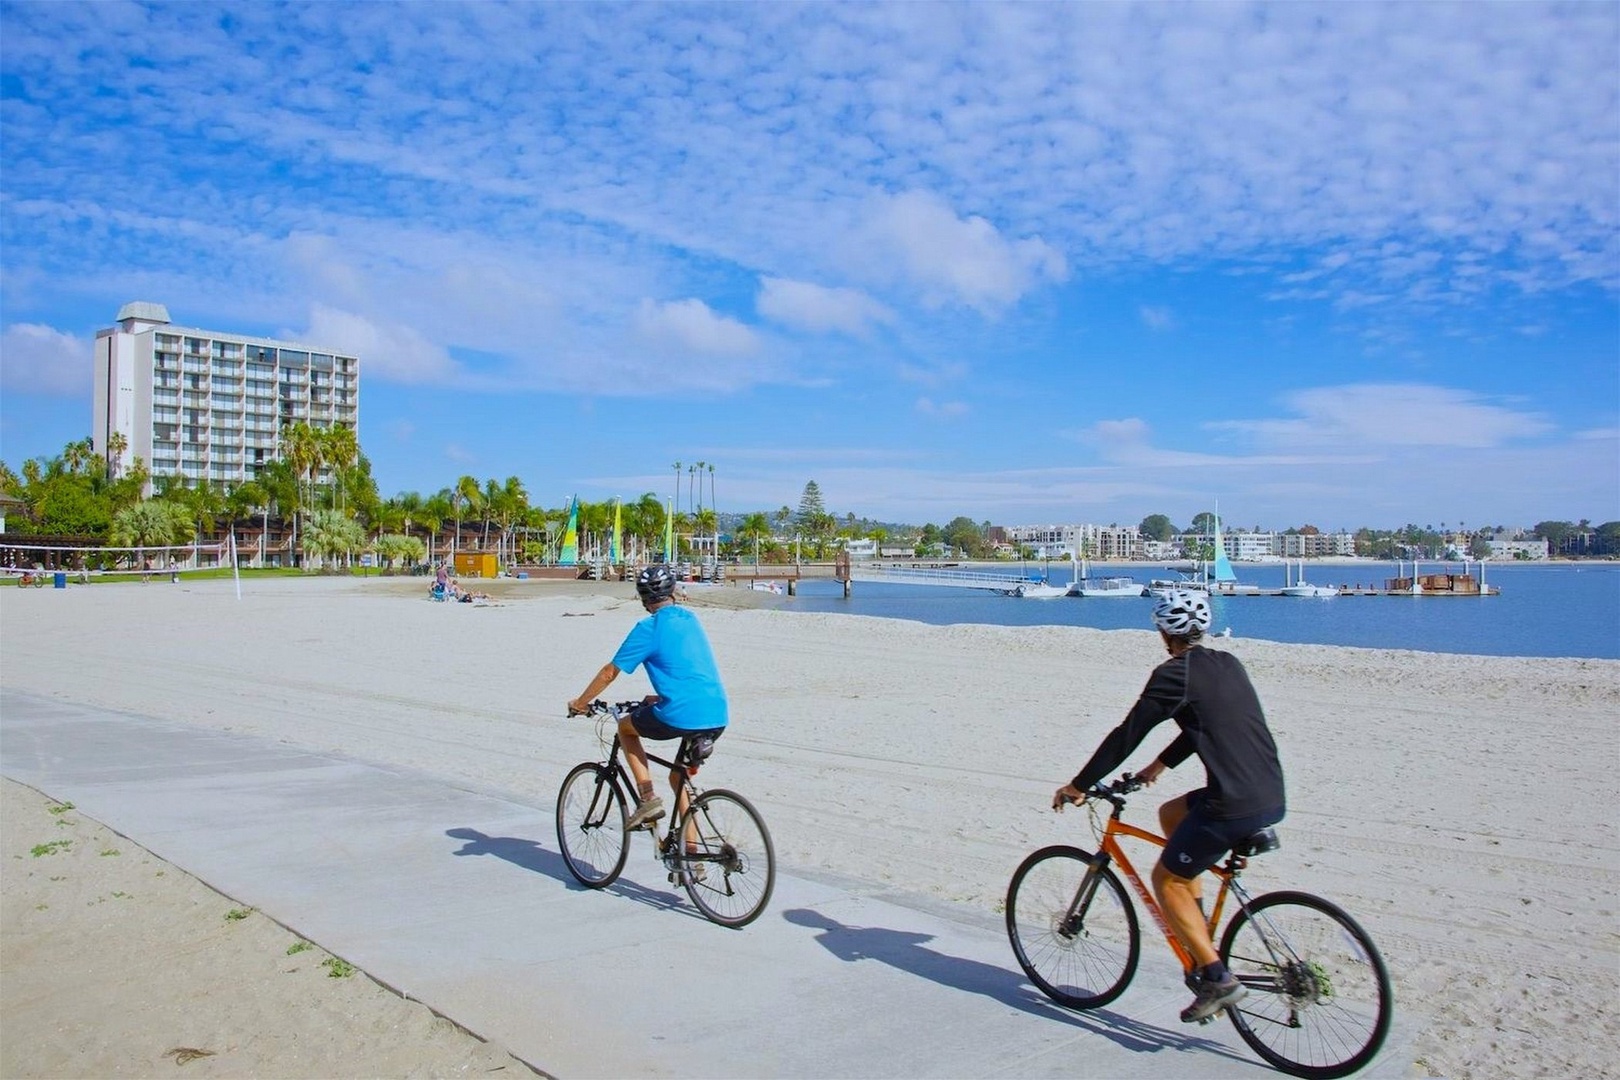 Rent some bikes and cruise the bay